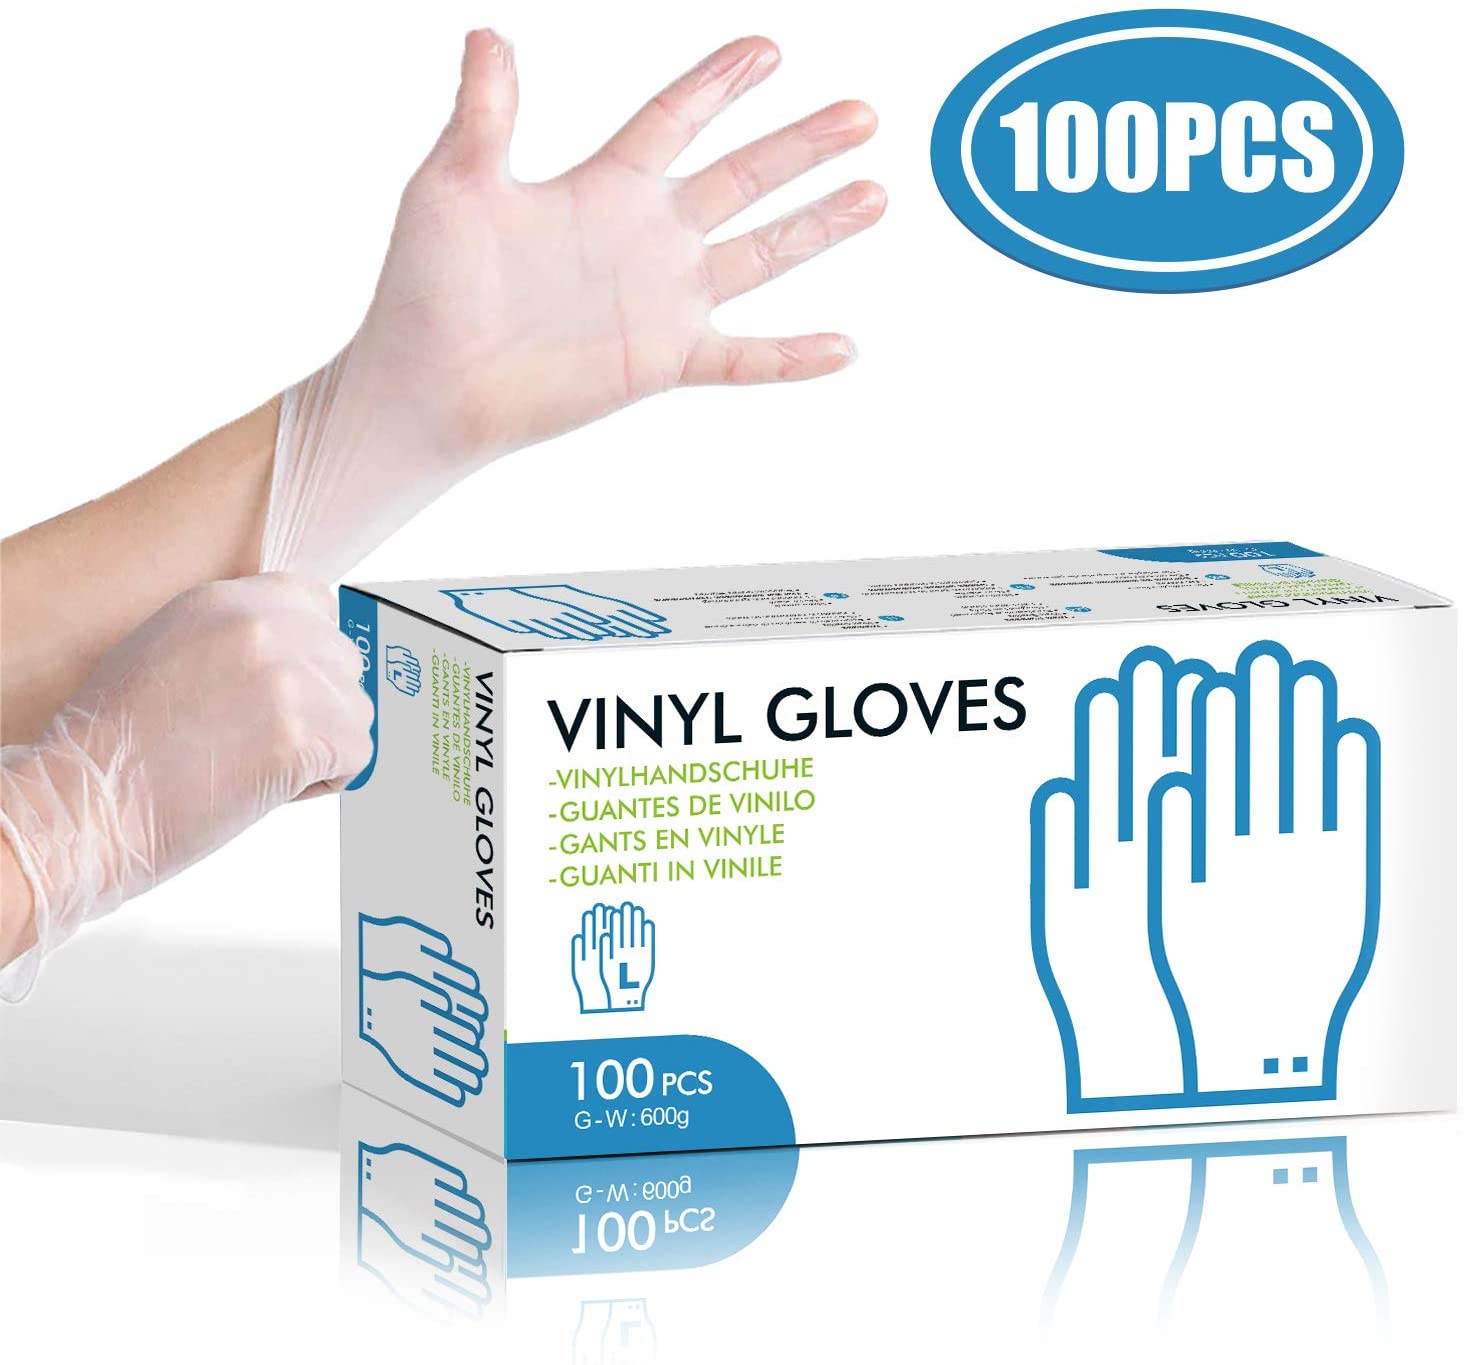 100Pcs-Tearproof-Antibacterial-Safety-Disposable-Glove-Powder-free-Top-Examination-Gloves-L-Size-Str-1659655-1